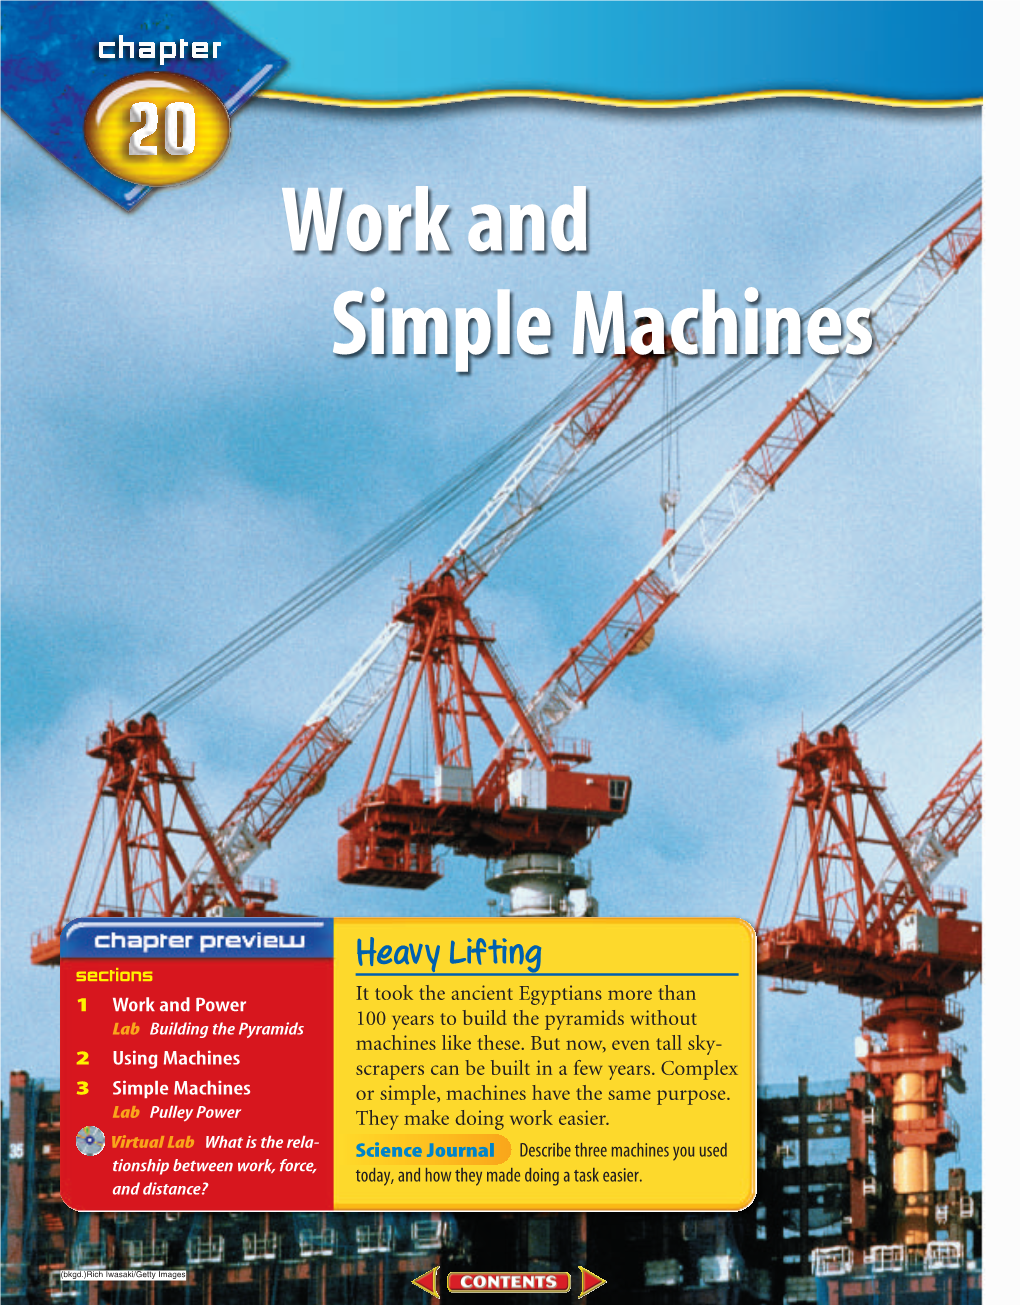 Chapter 20: Work and Simple Machines